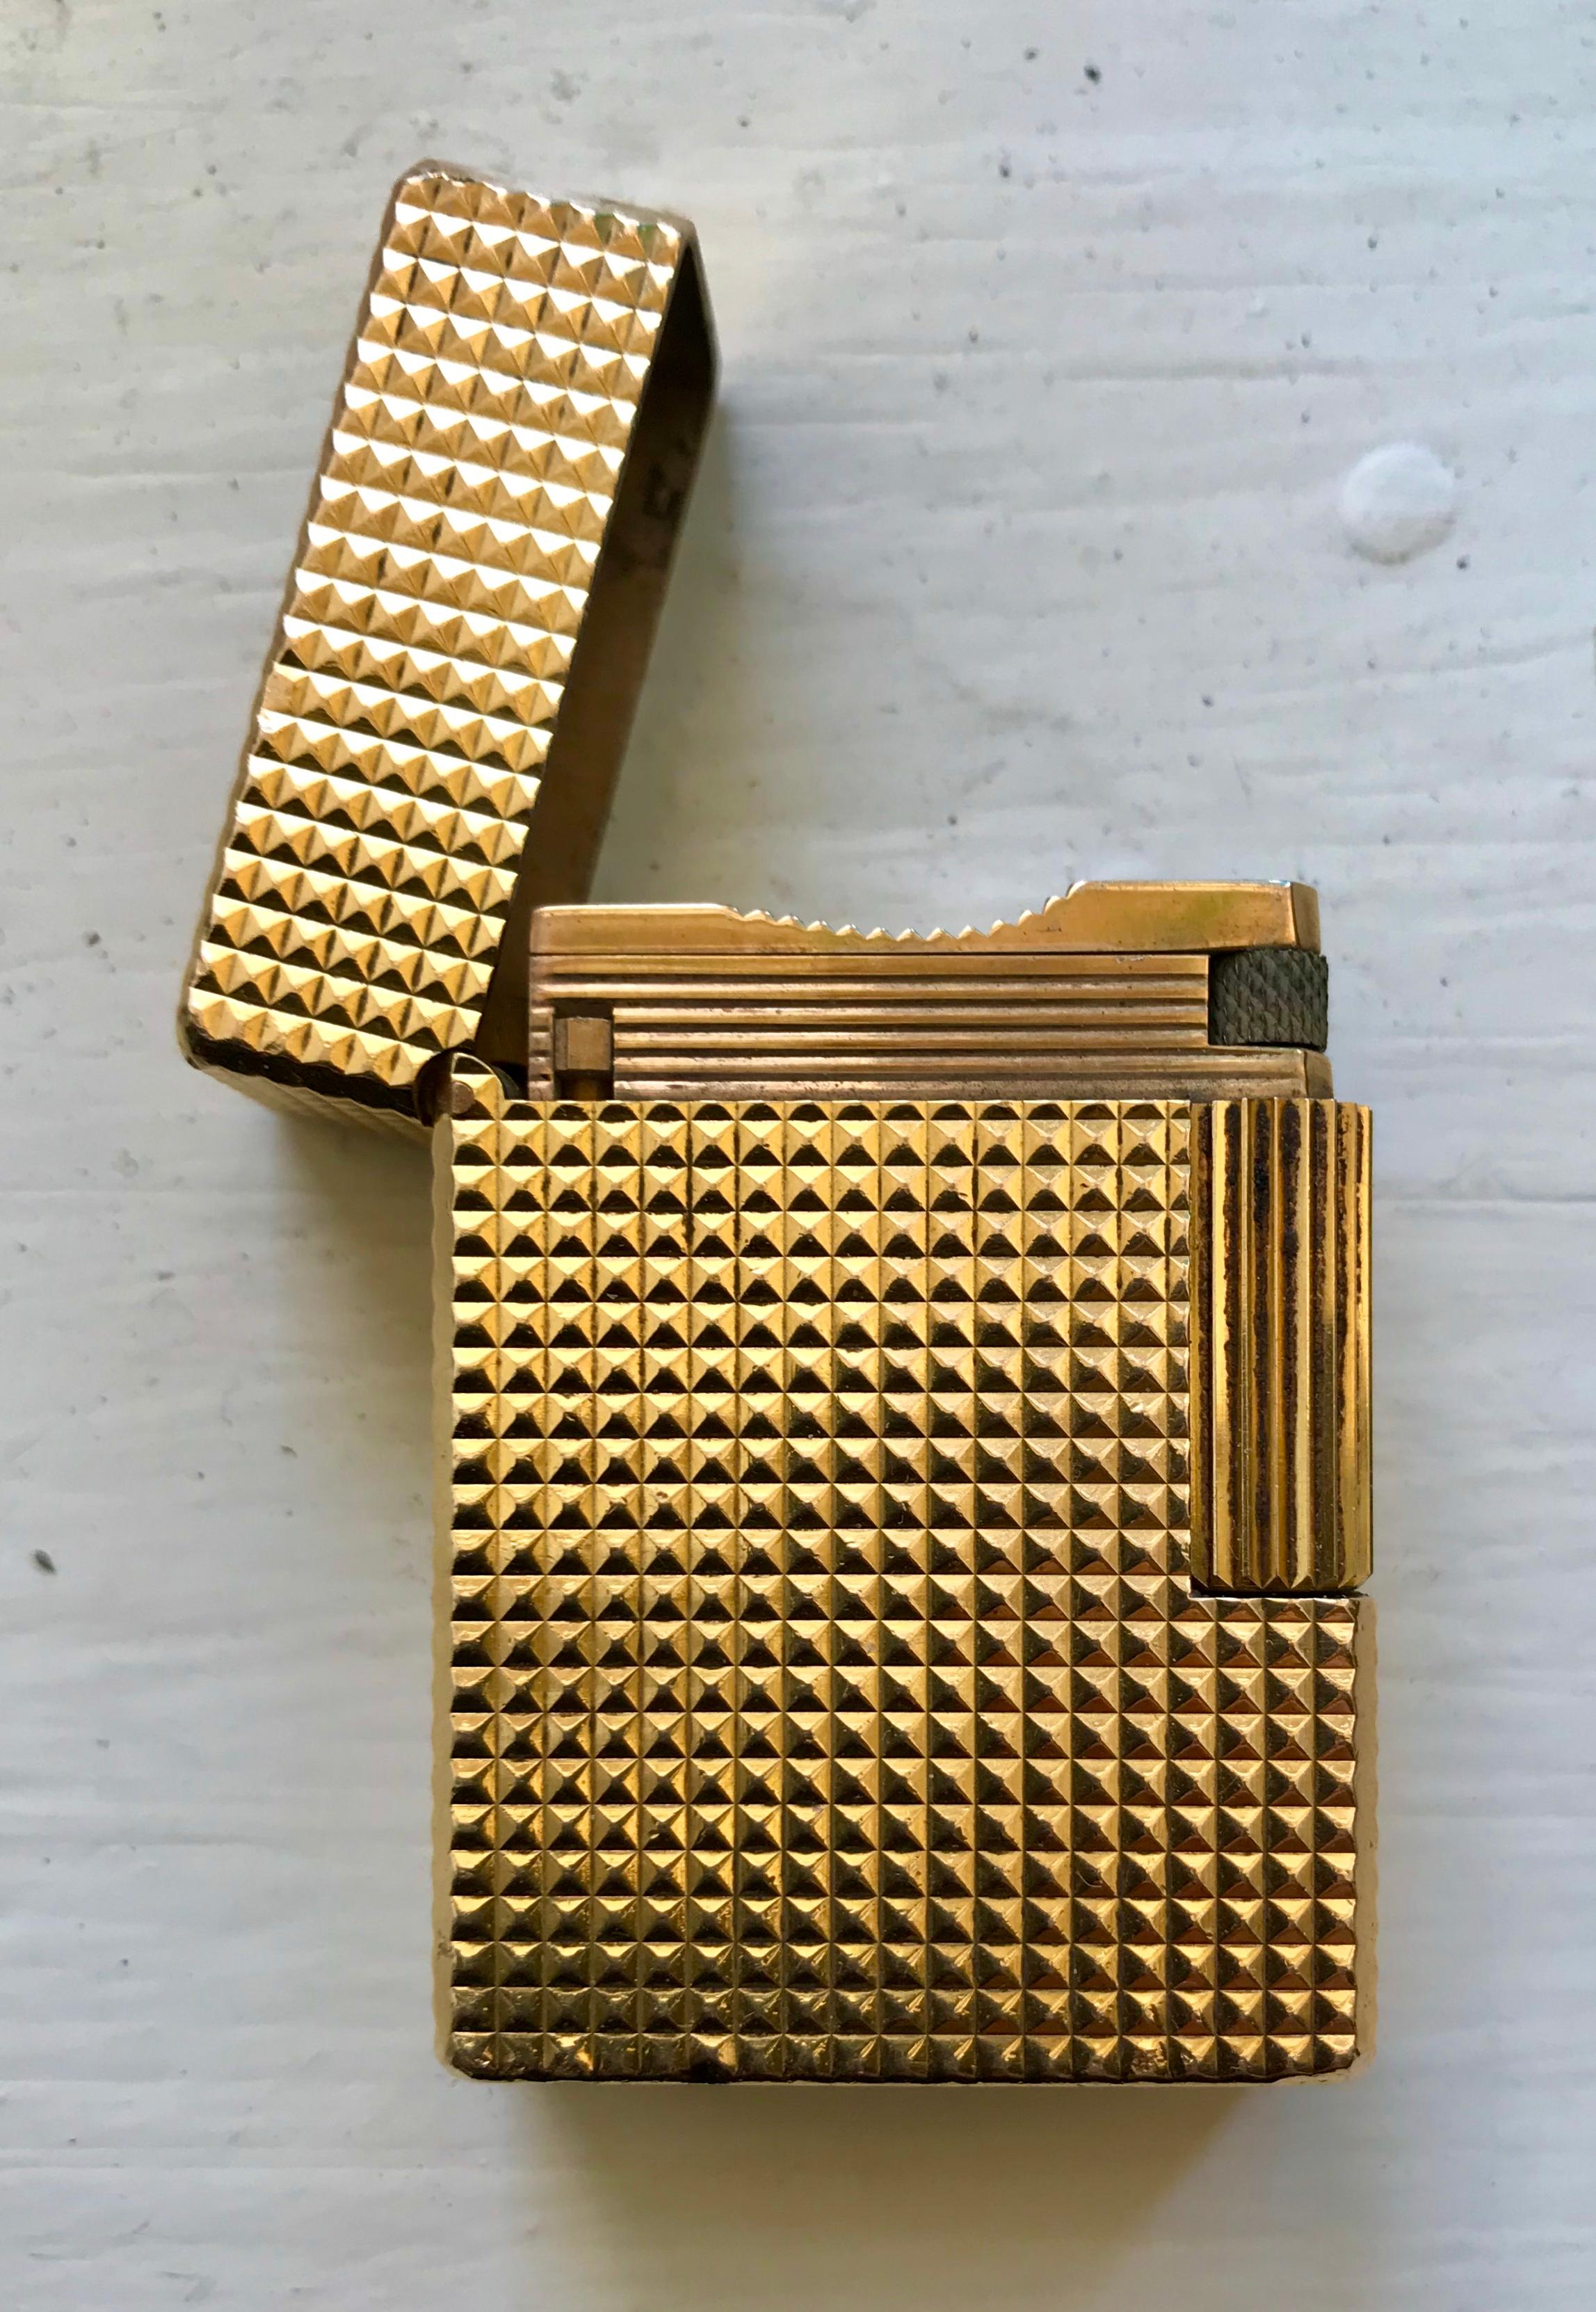 Gold Plate Vintage Gold-Plated Diamond Head Pocket Gas Lighter By S. T. Dupont, Paris